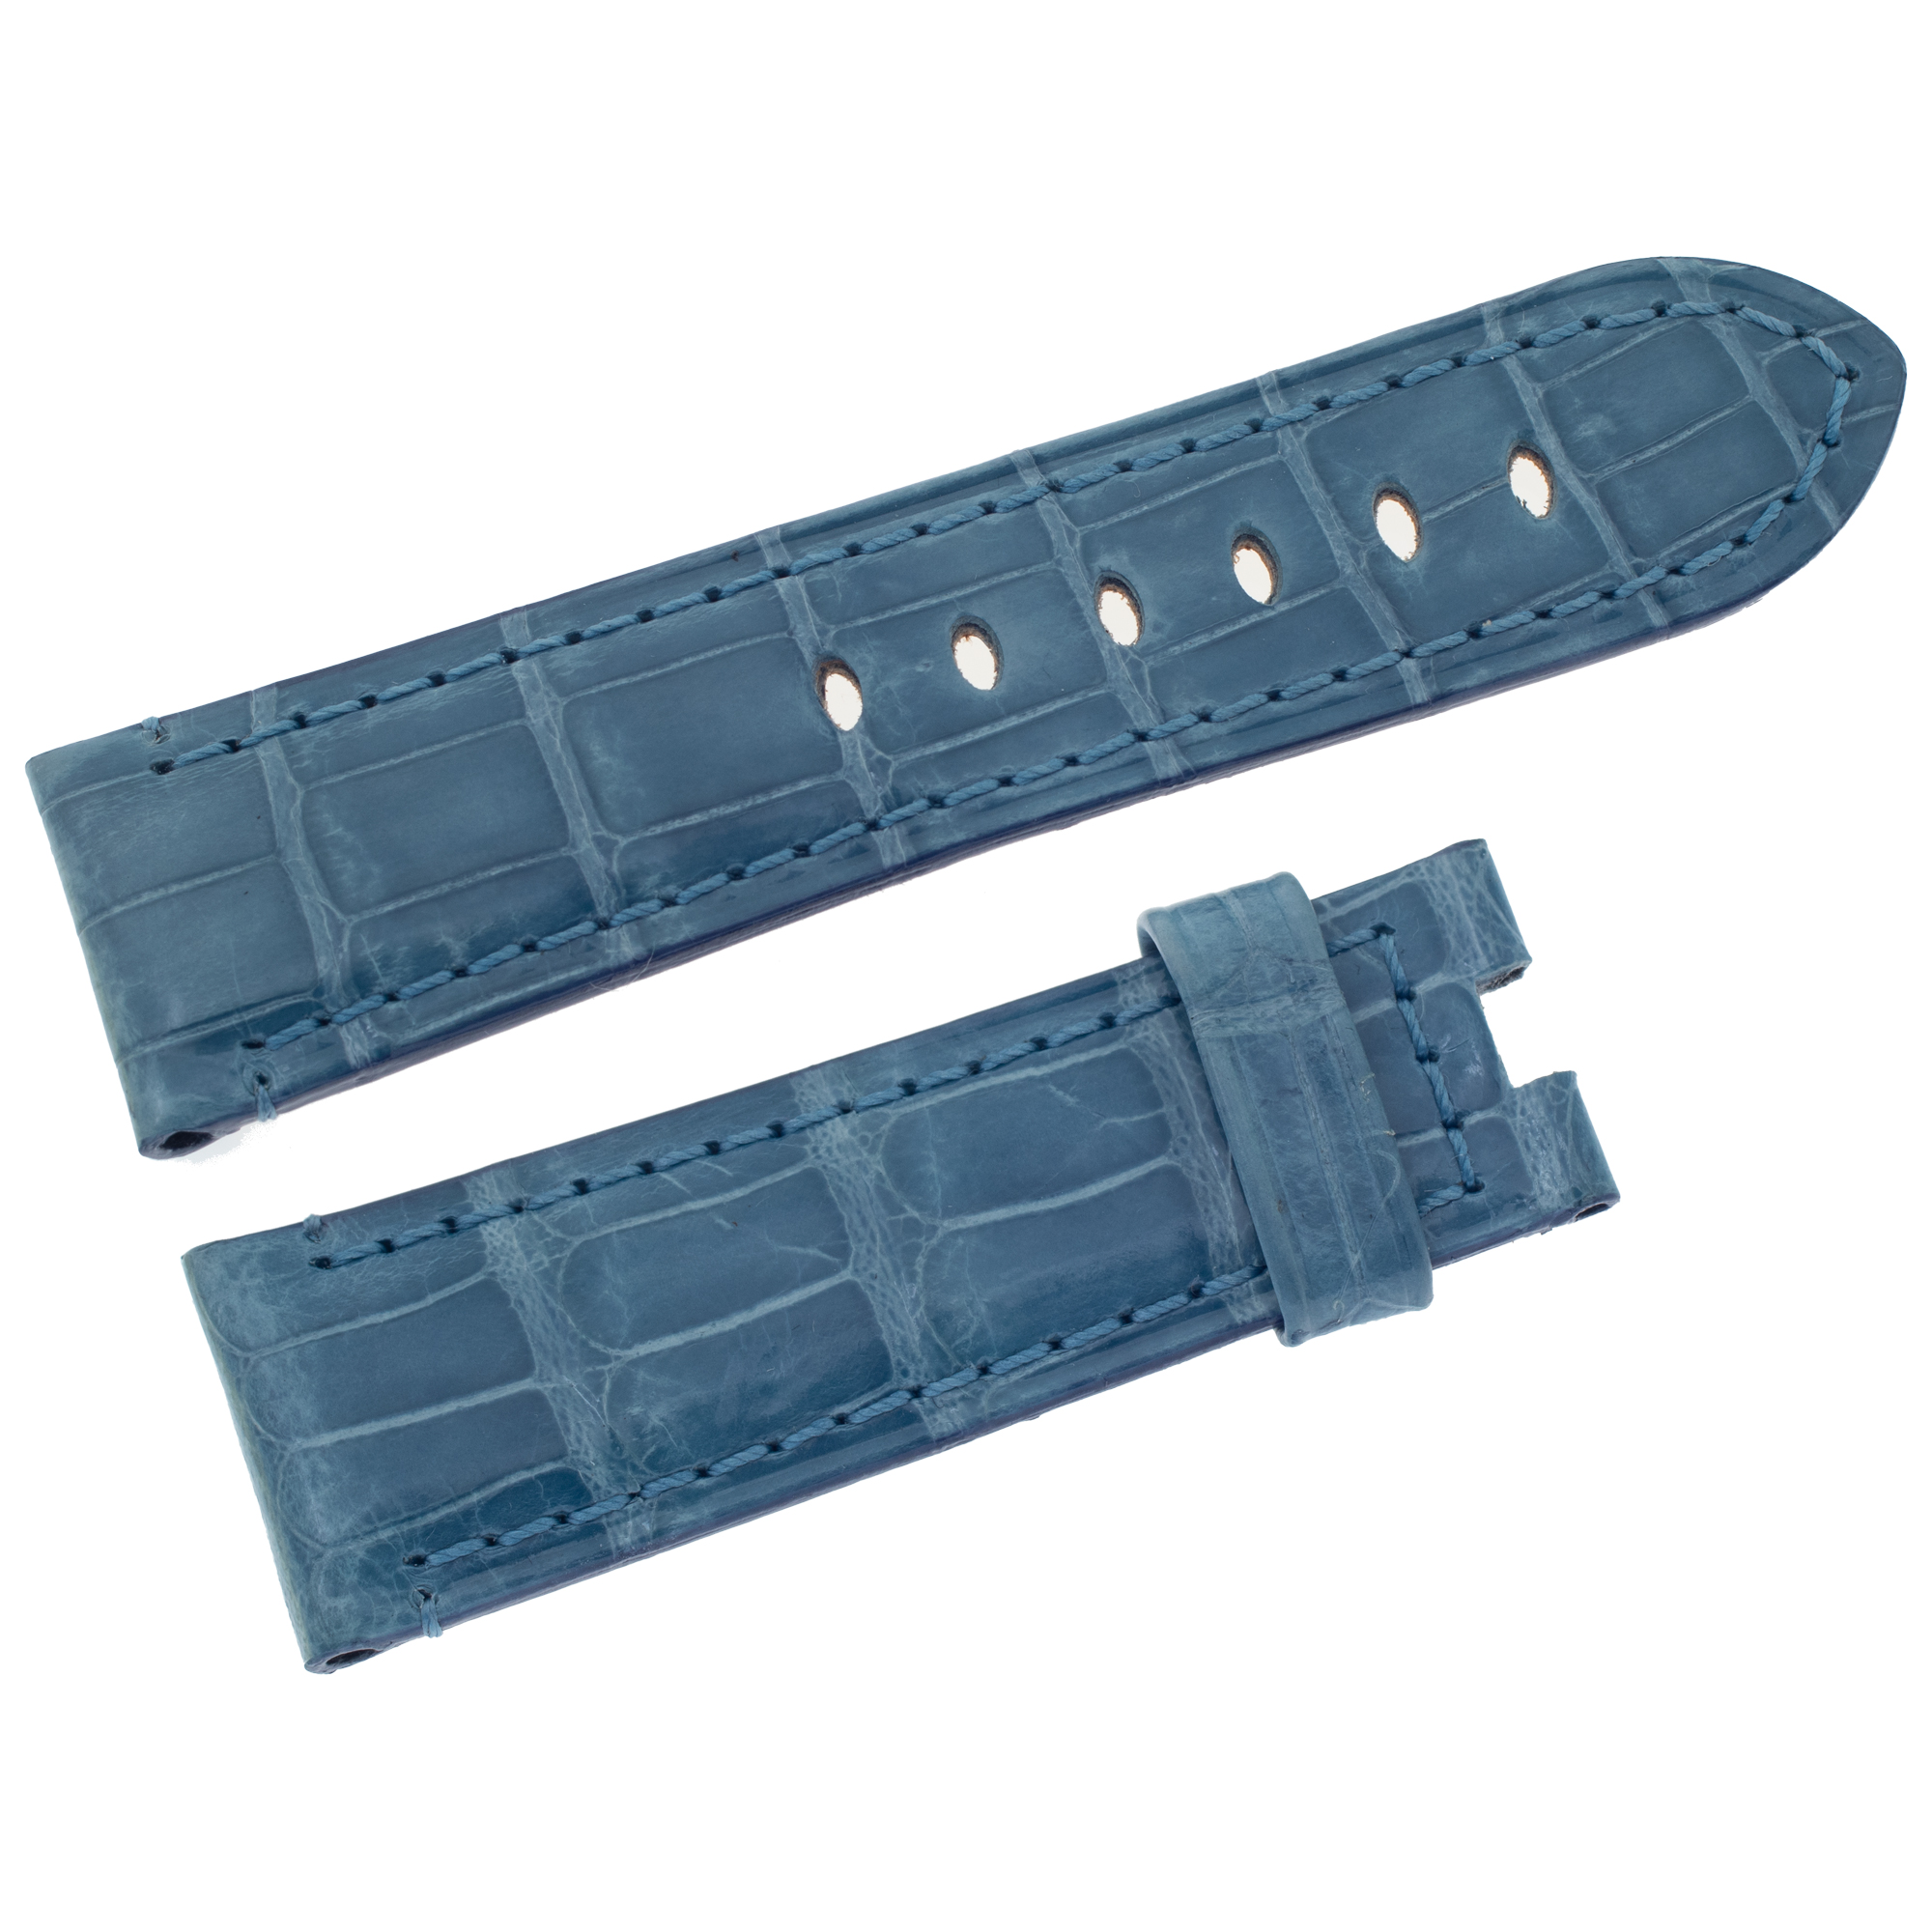 Panerai Bluette shiny alligator strap for tang buckle (22mm x 20mm)